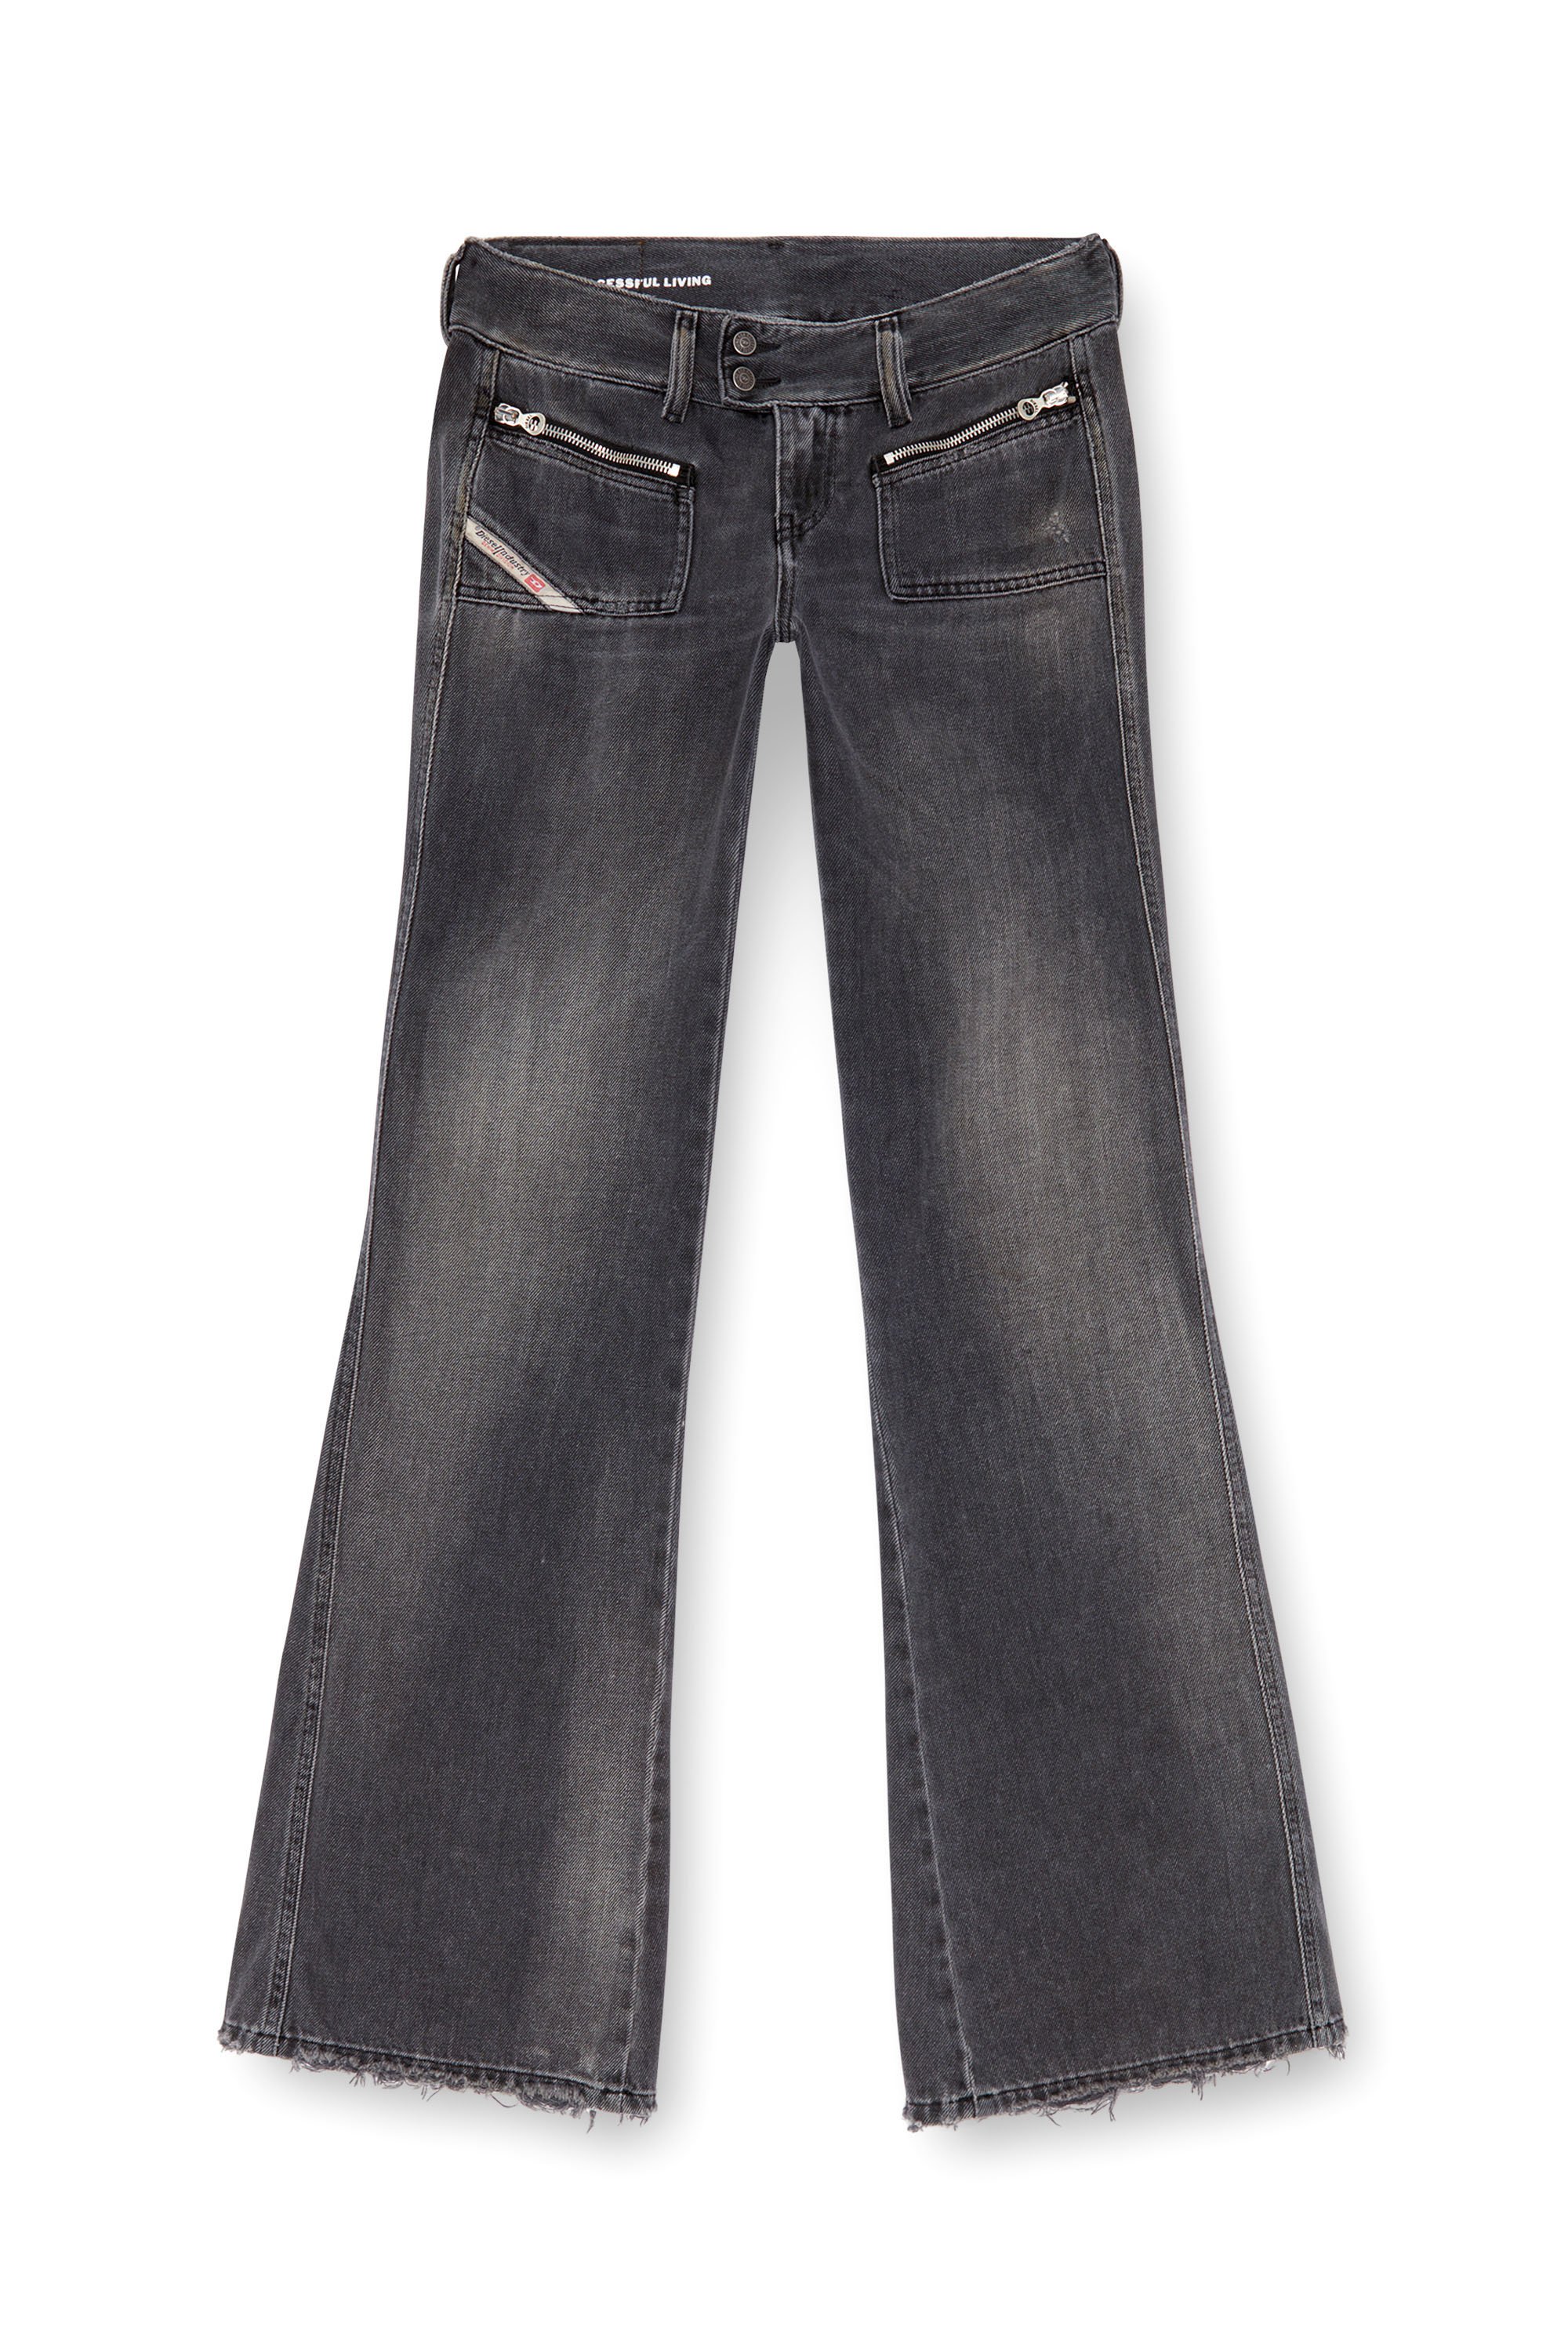 Diesel - Bootcut and Flare Jeans D-Hush 09K14, Mujer Bootcut y Flare Jeans - D-Hush in Negro - Image 5